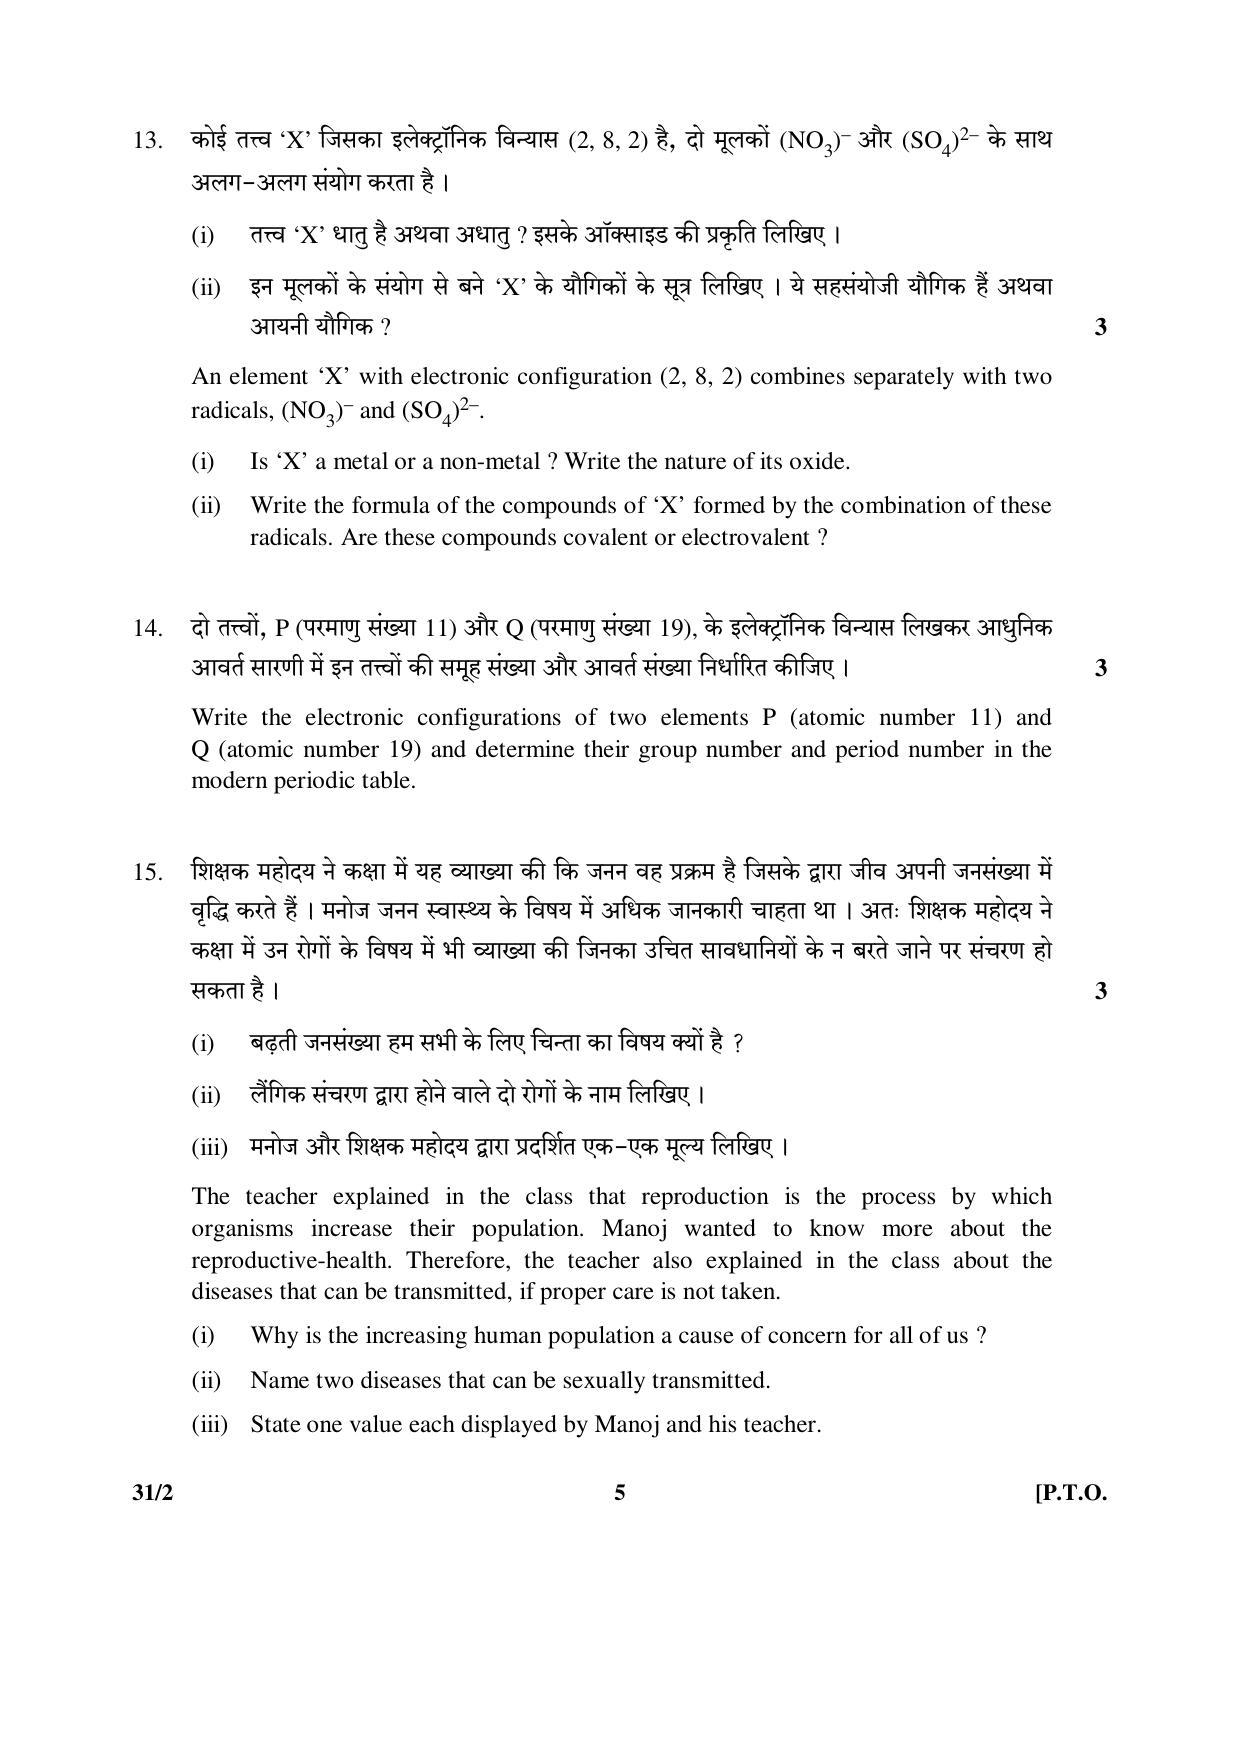 CBSE Class 10 31-2 (Science) 2017-comptt Question Paper - Page 5